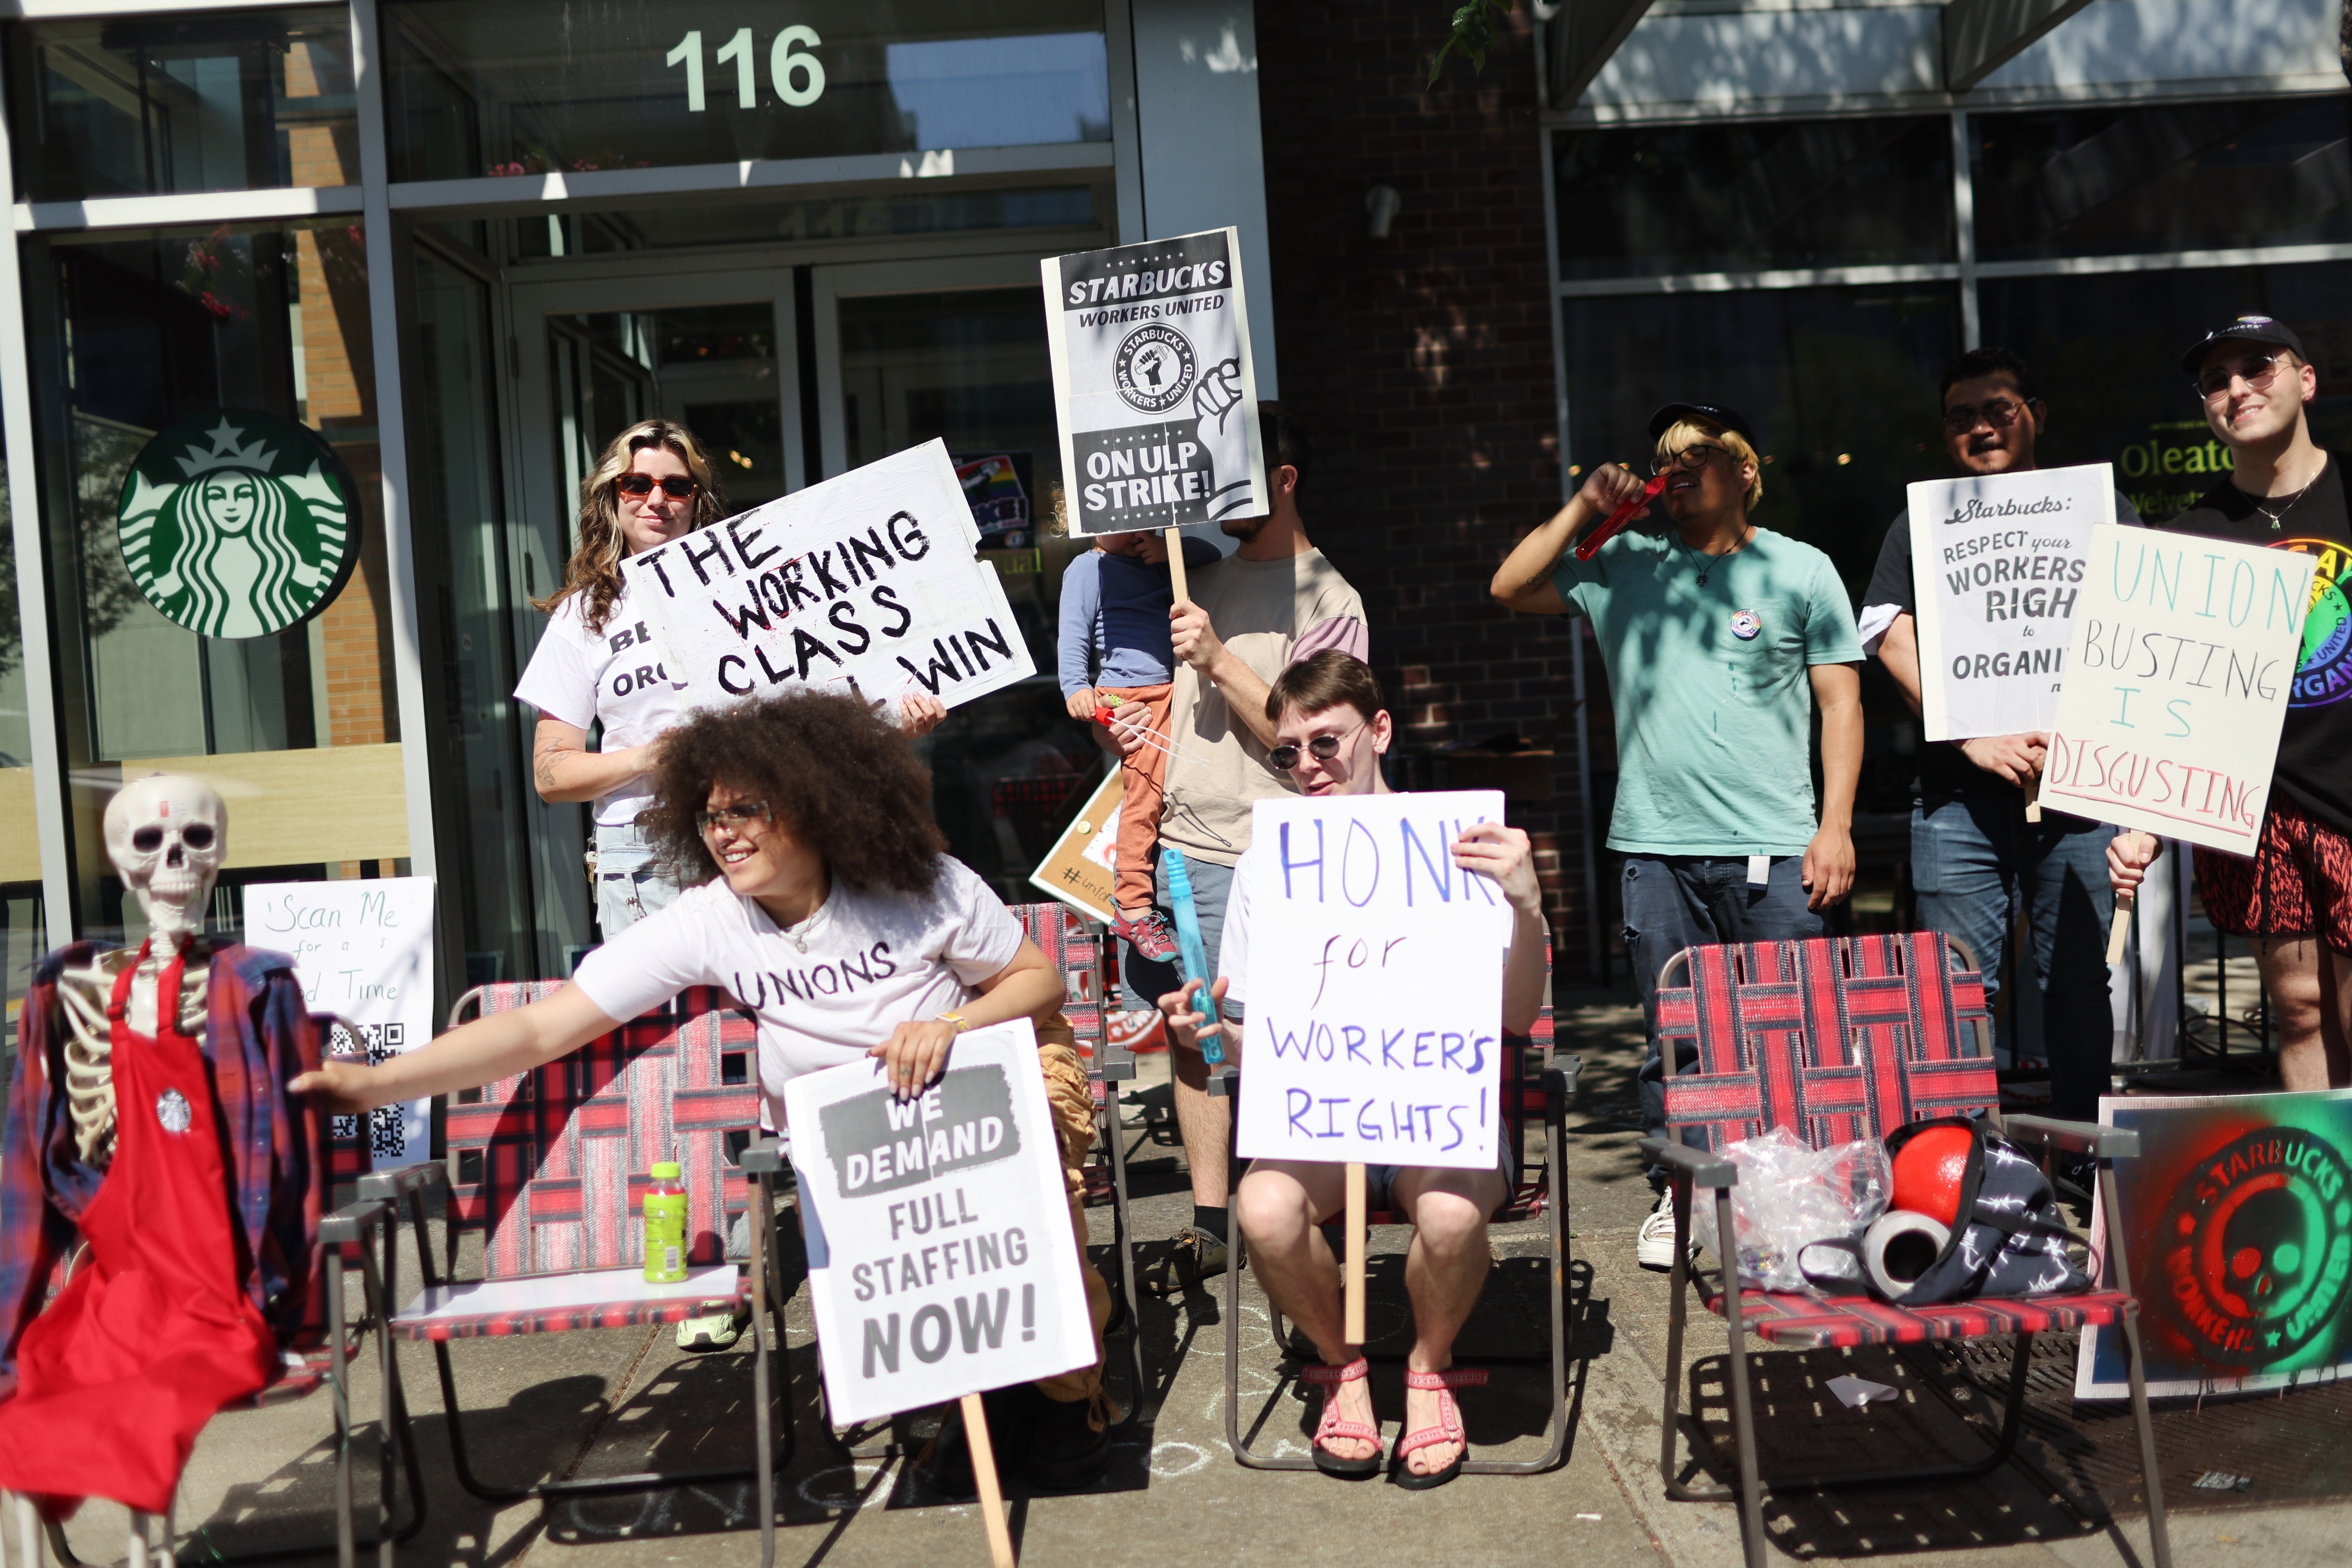 A group of people with protest signs demanding fair pay in front of a Starbucks